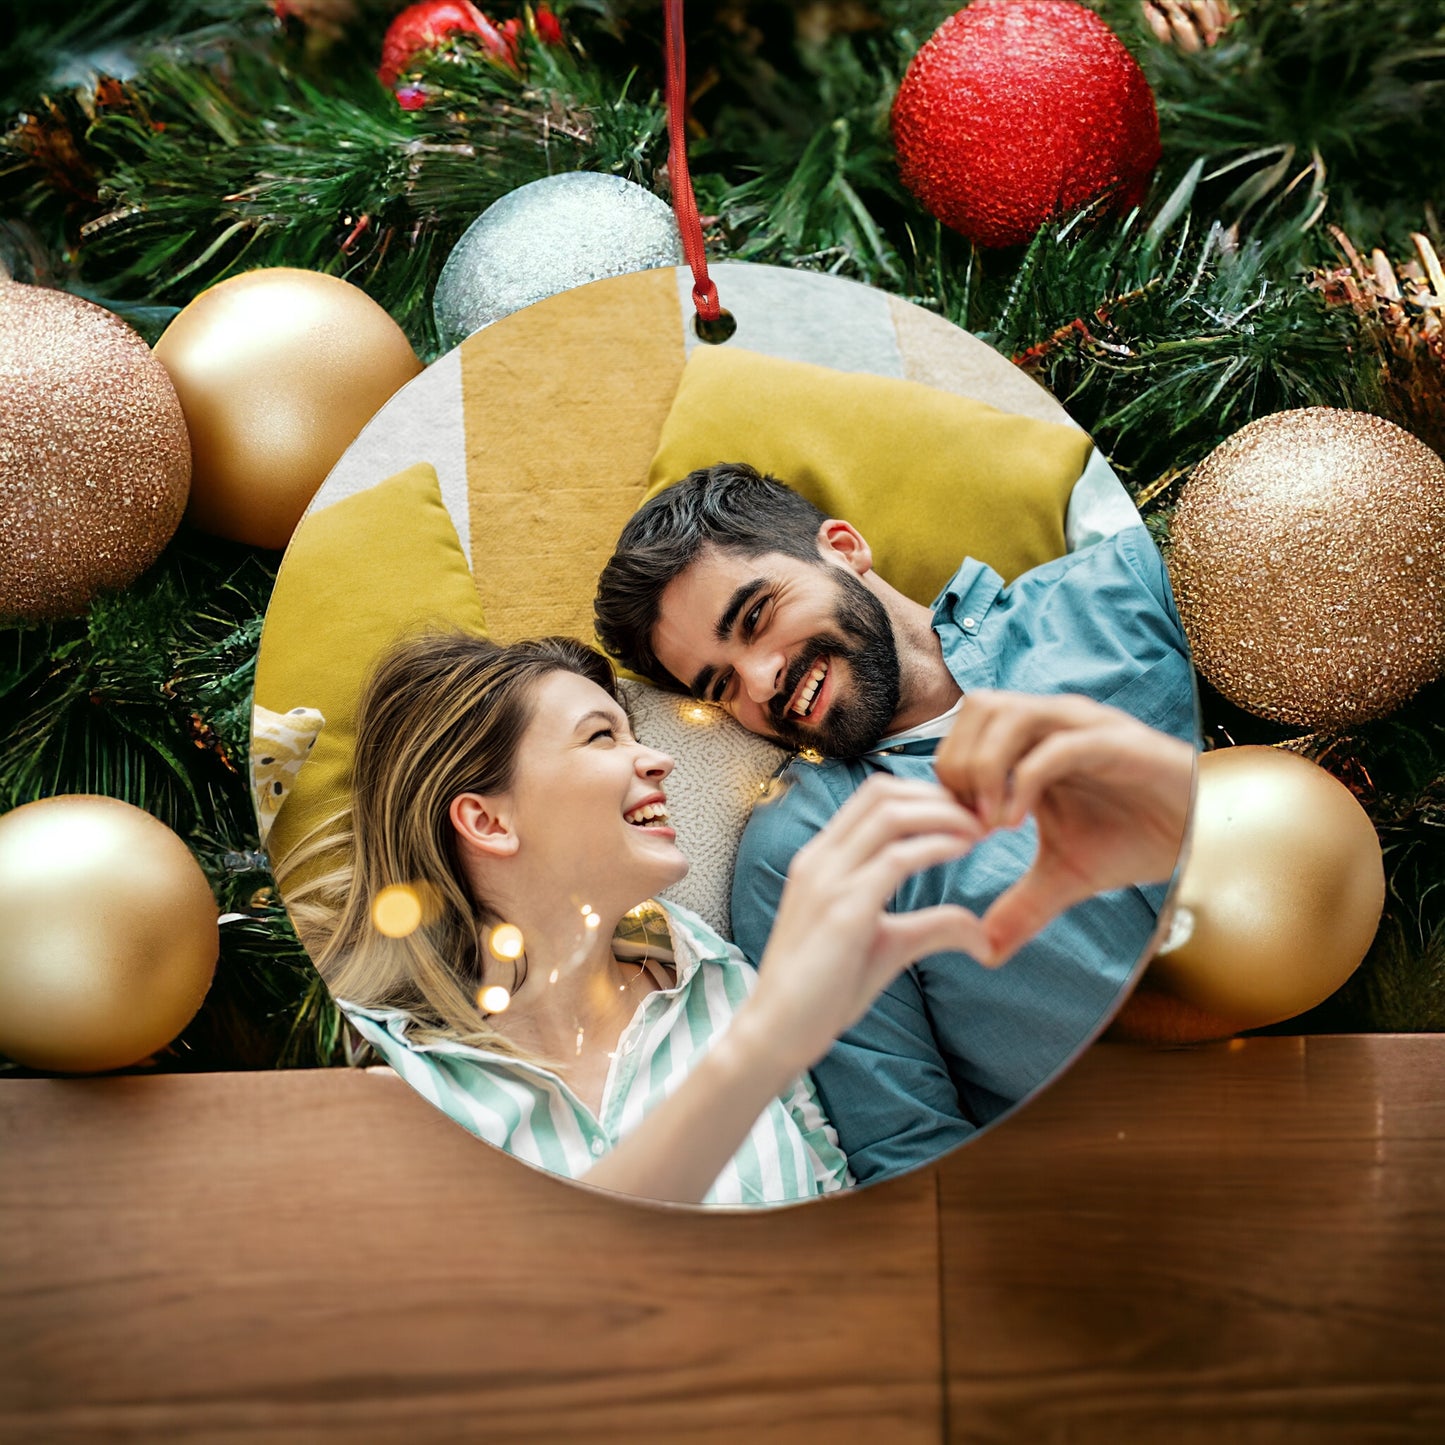 Put Any Photo On A Christmas Ornament - Personalized Christmas Ornament - Custom Ornament - Holiday Ornament - Family Photo - Couple Ornament